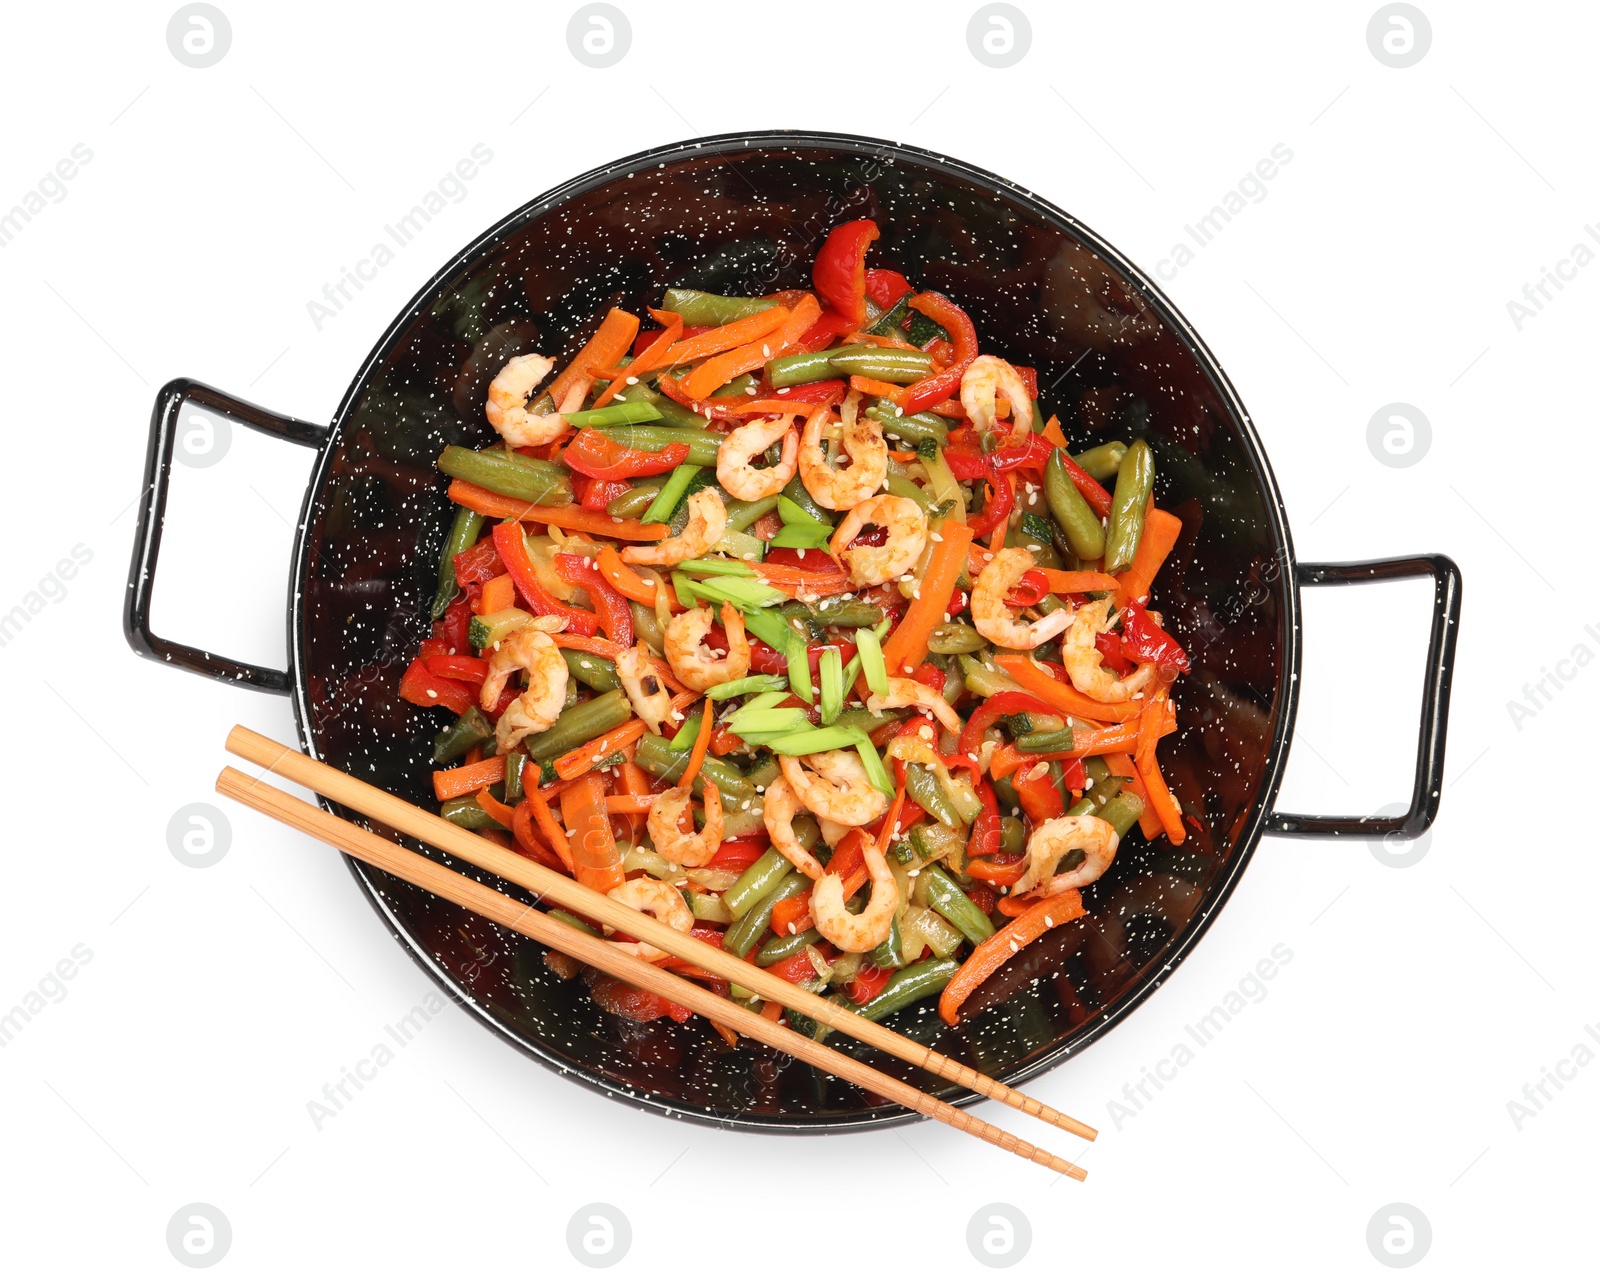 Photo of Shrimp stir fry with vegetables in wok and chopsticks on white background, top view